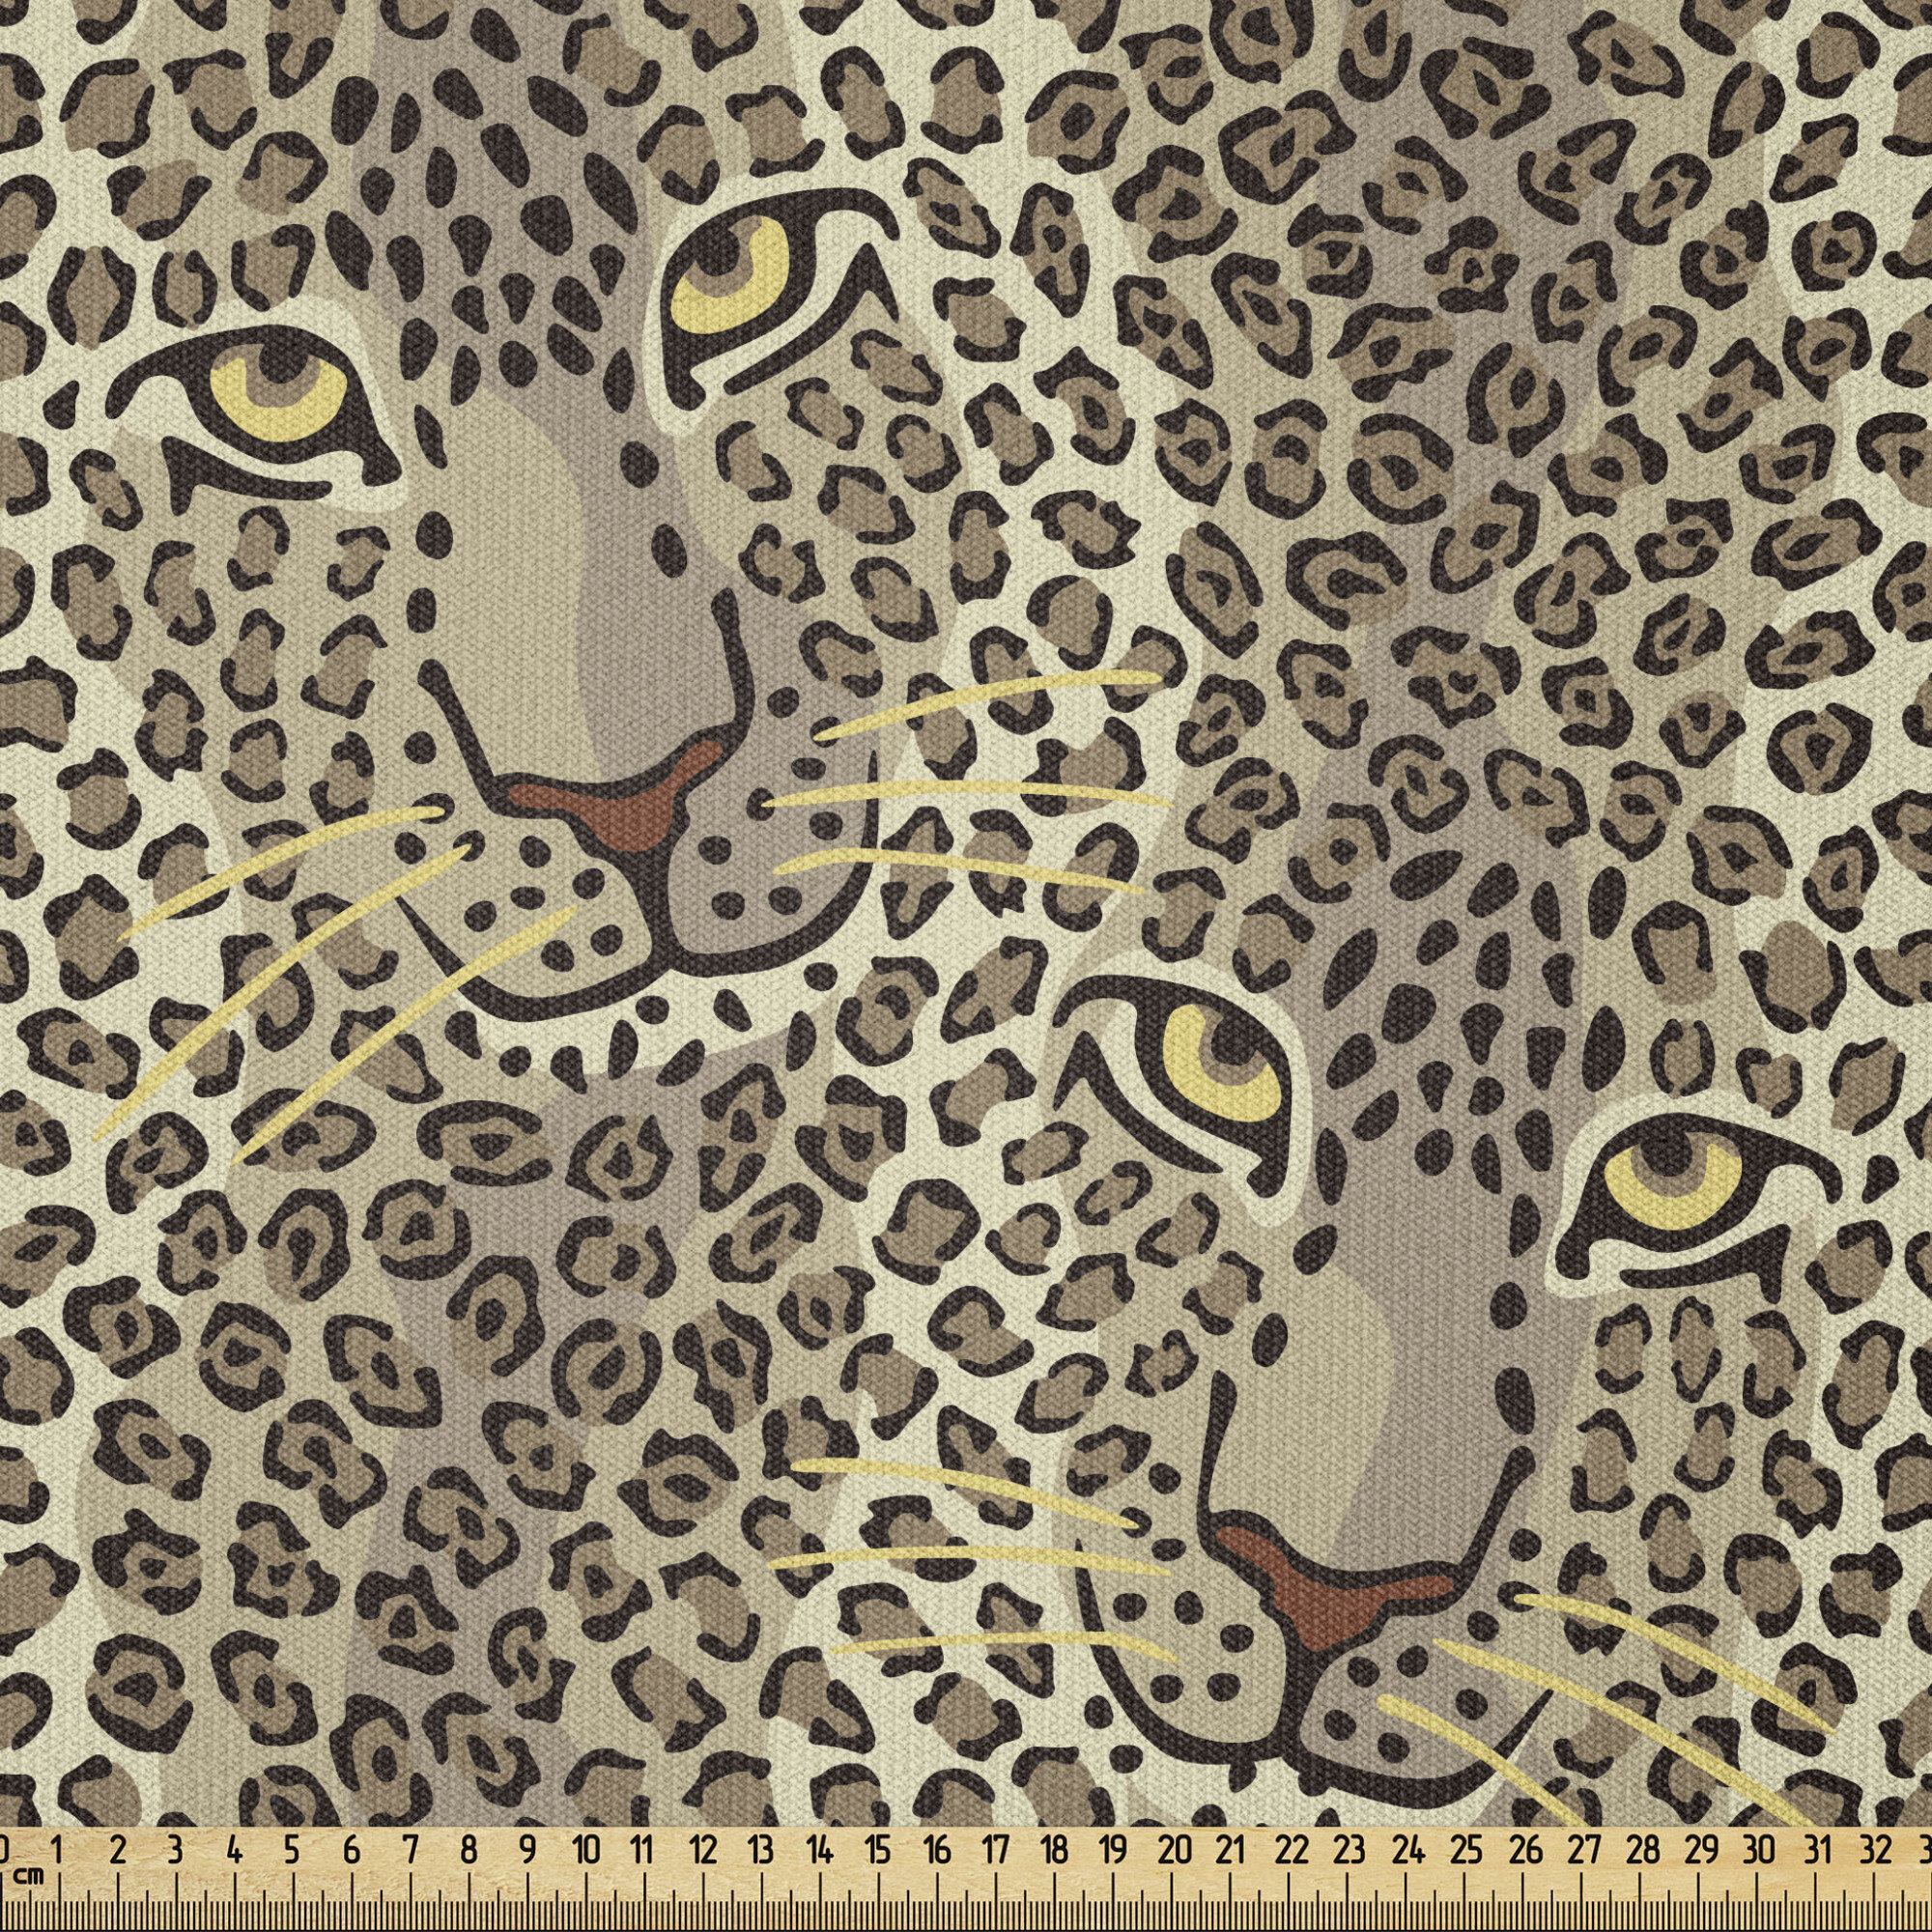 East Urban Home Ambesonne Leopard Print Fabric By The Yard, Repetitive  Cartoon Leo Wild Big Cat Faces In Natural Earthy Tones,Square | Wayfair